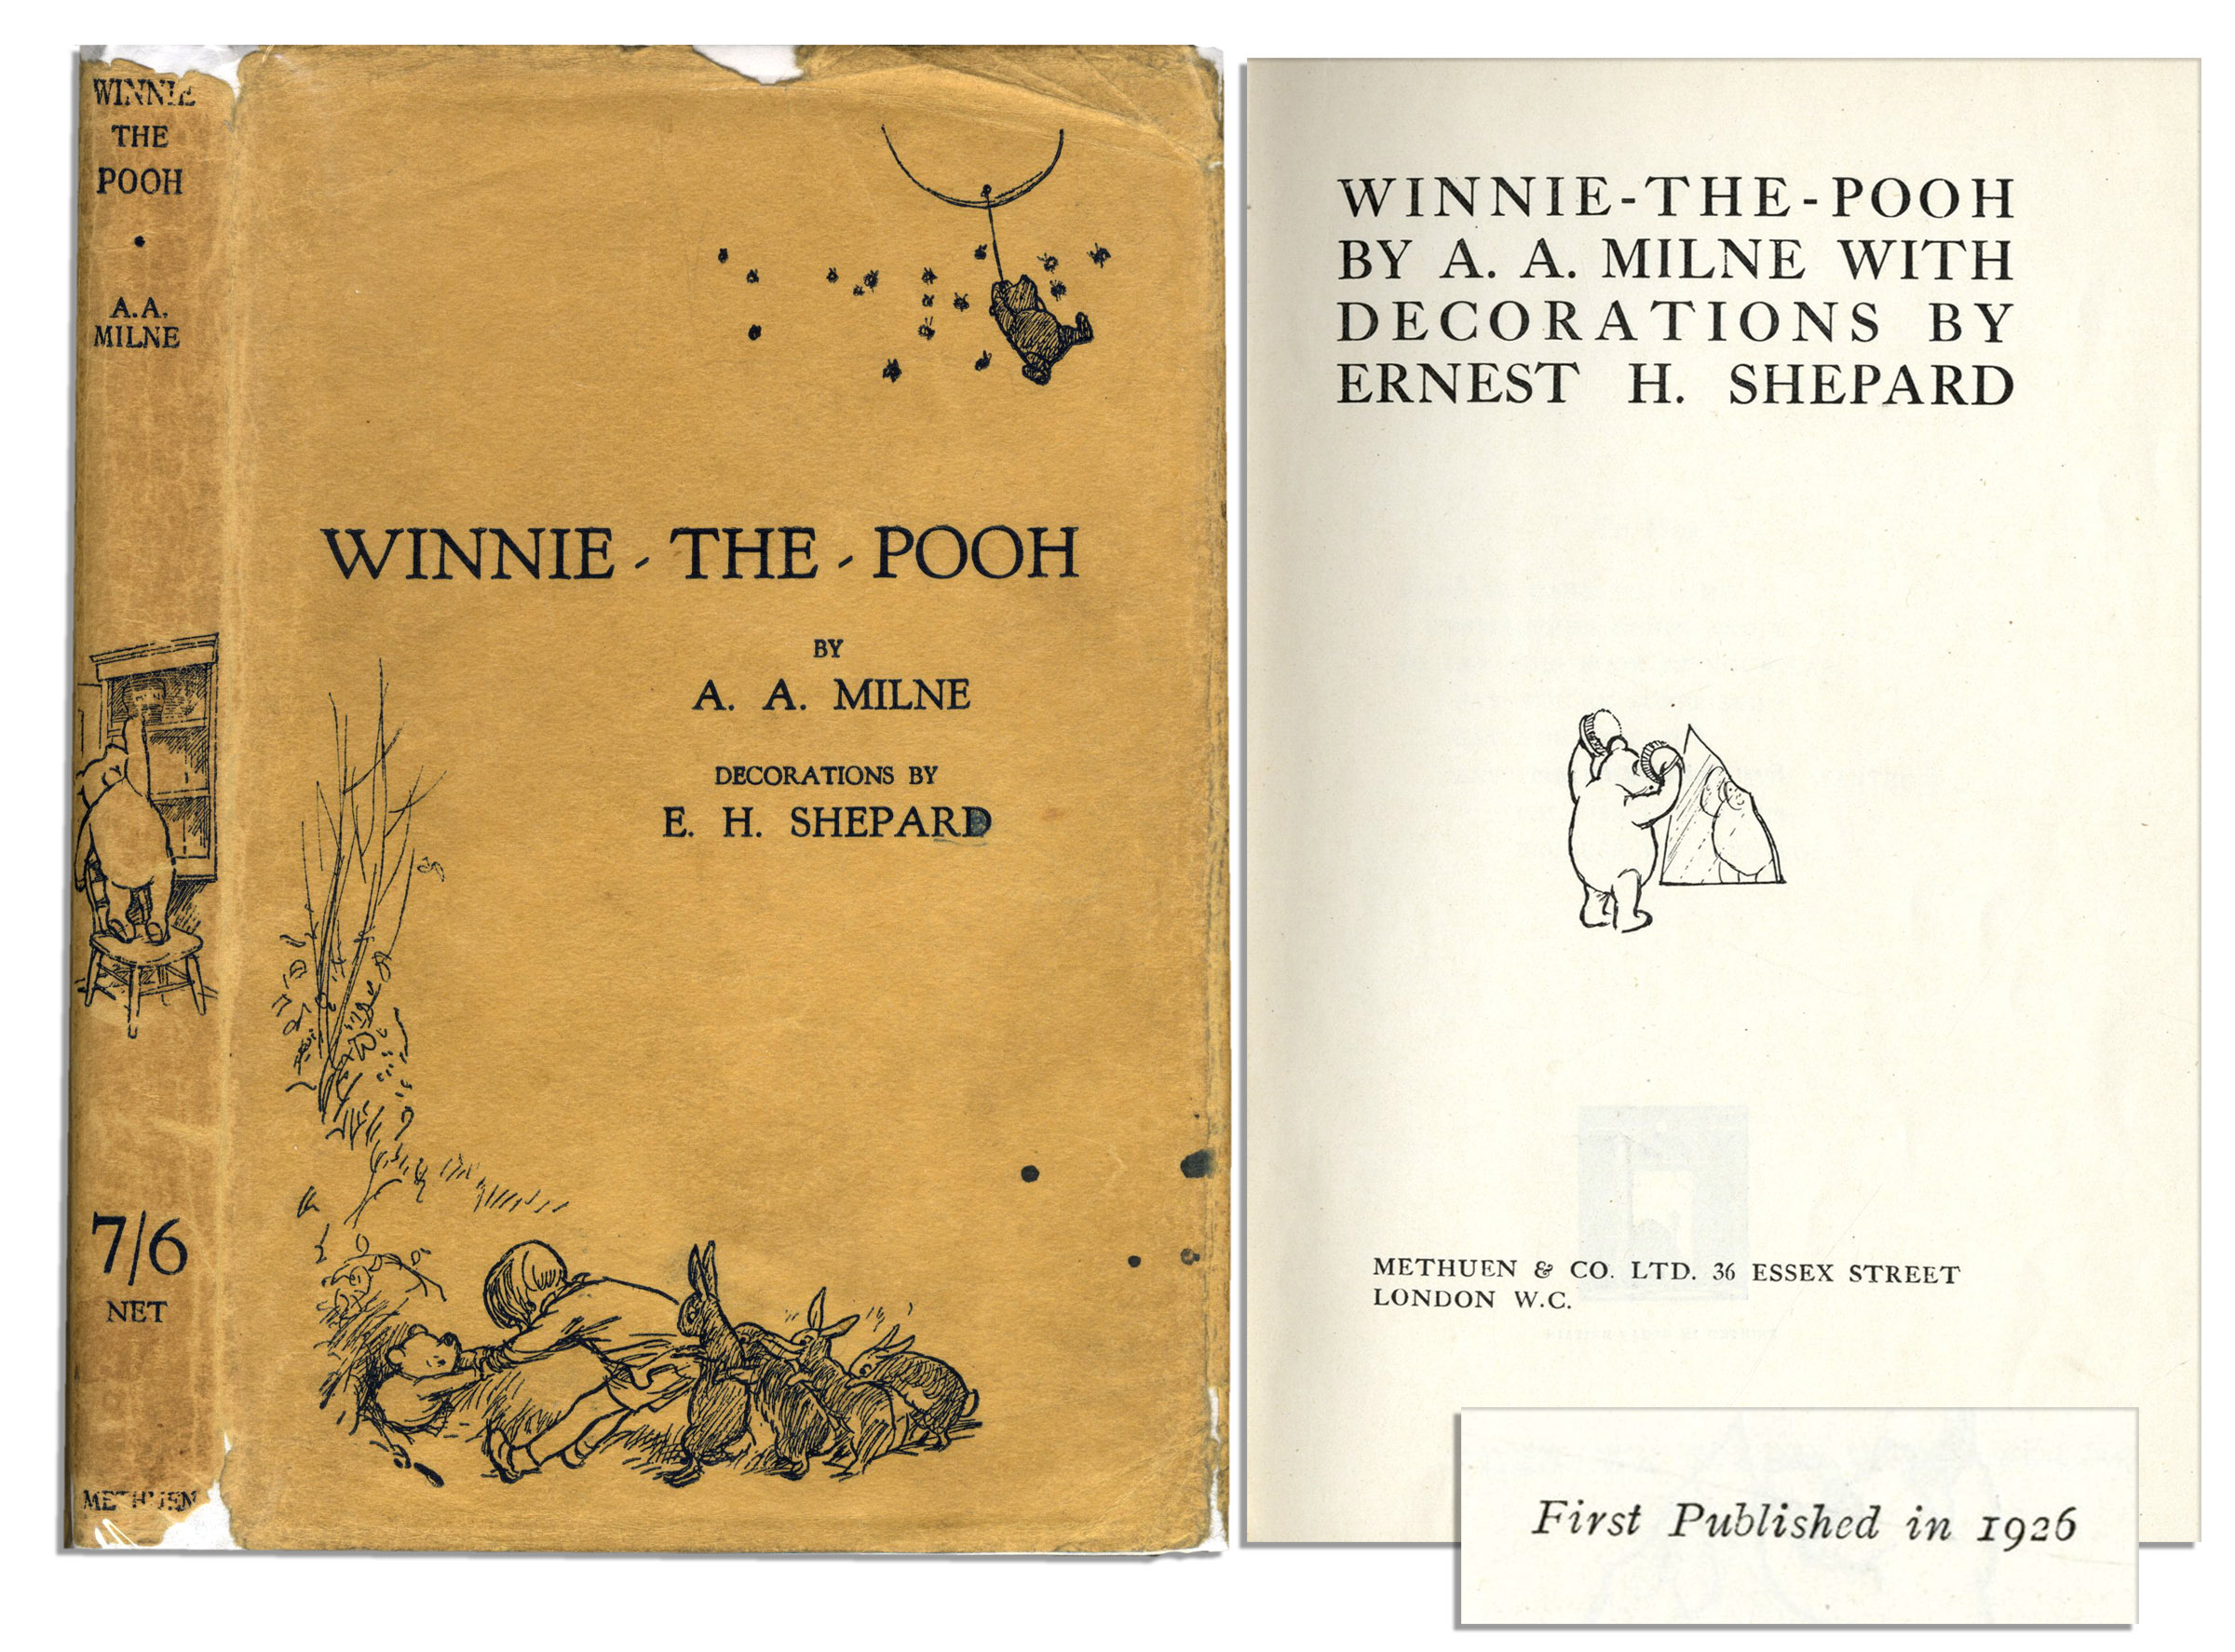 Image result for the book winnie the pooh debut in 1926